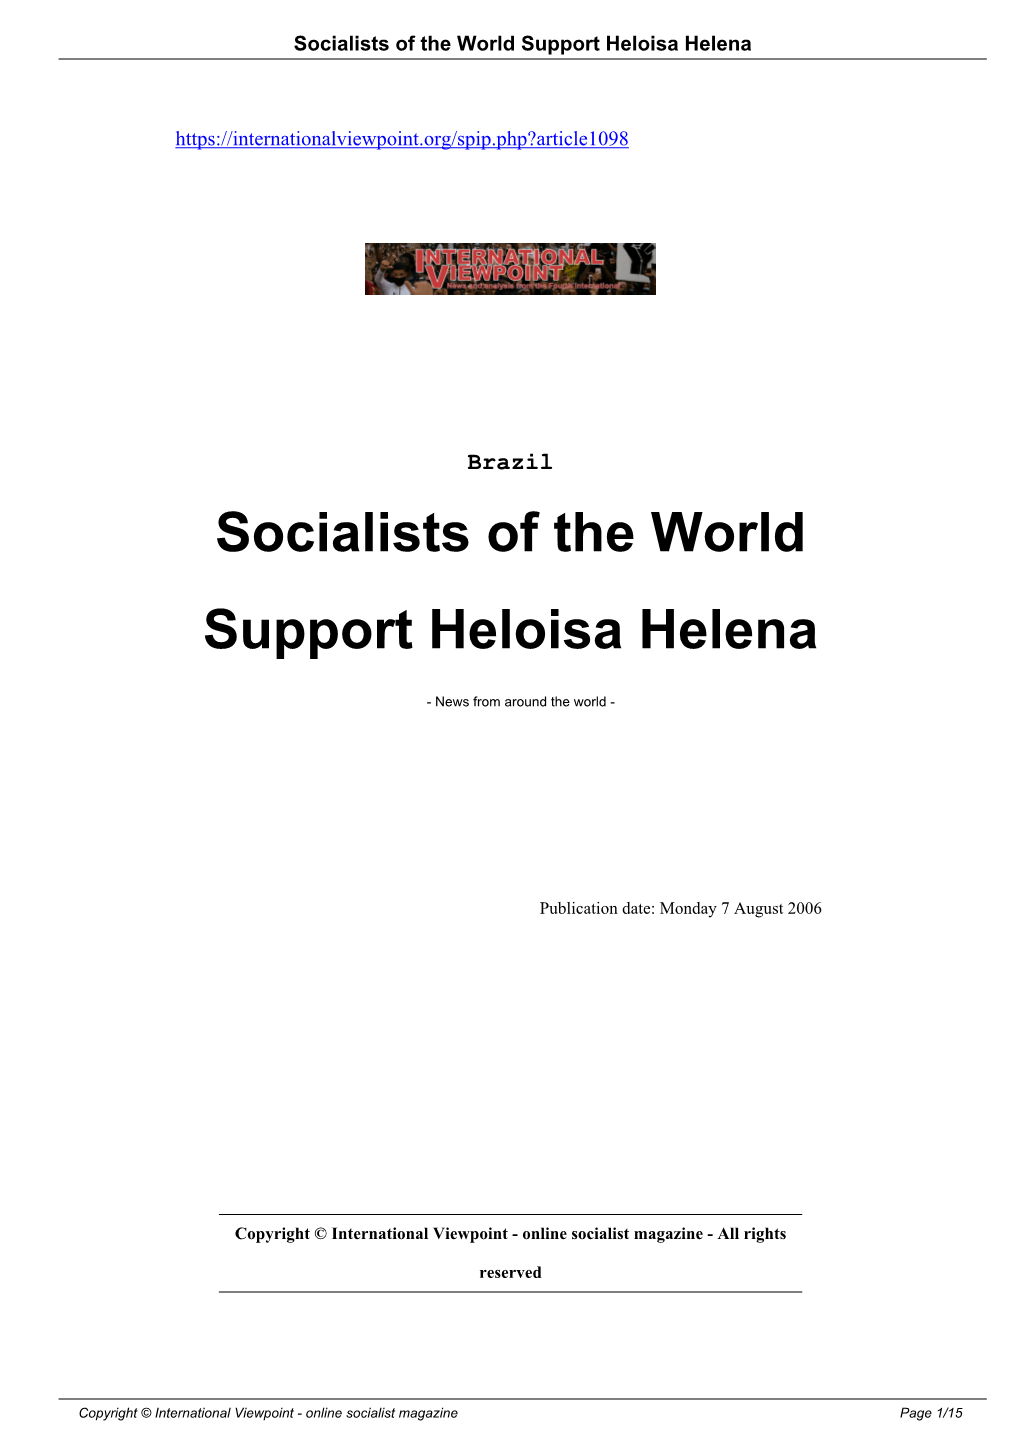 Socialists of the World Support Heloisa Helena